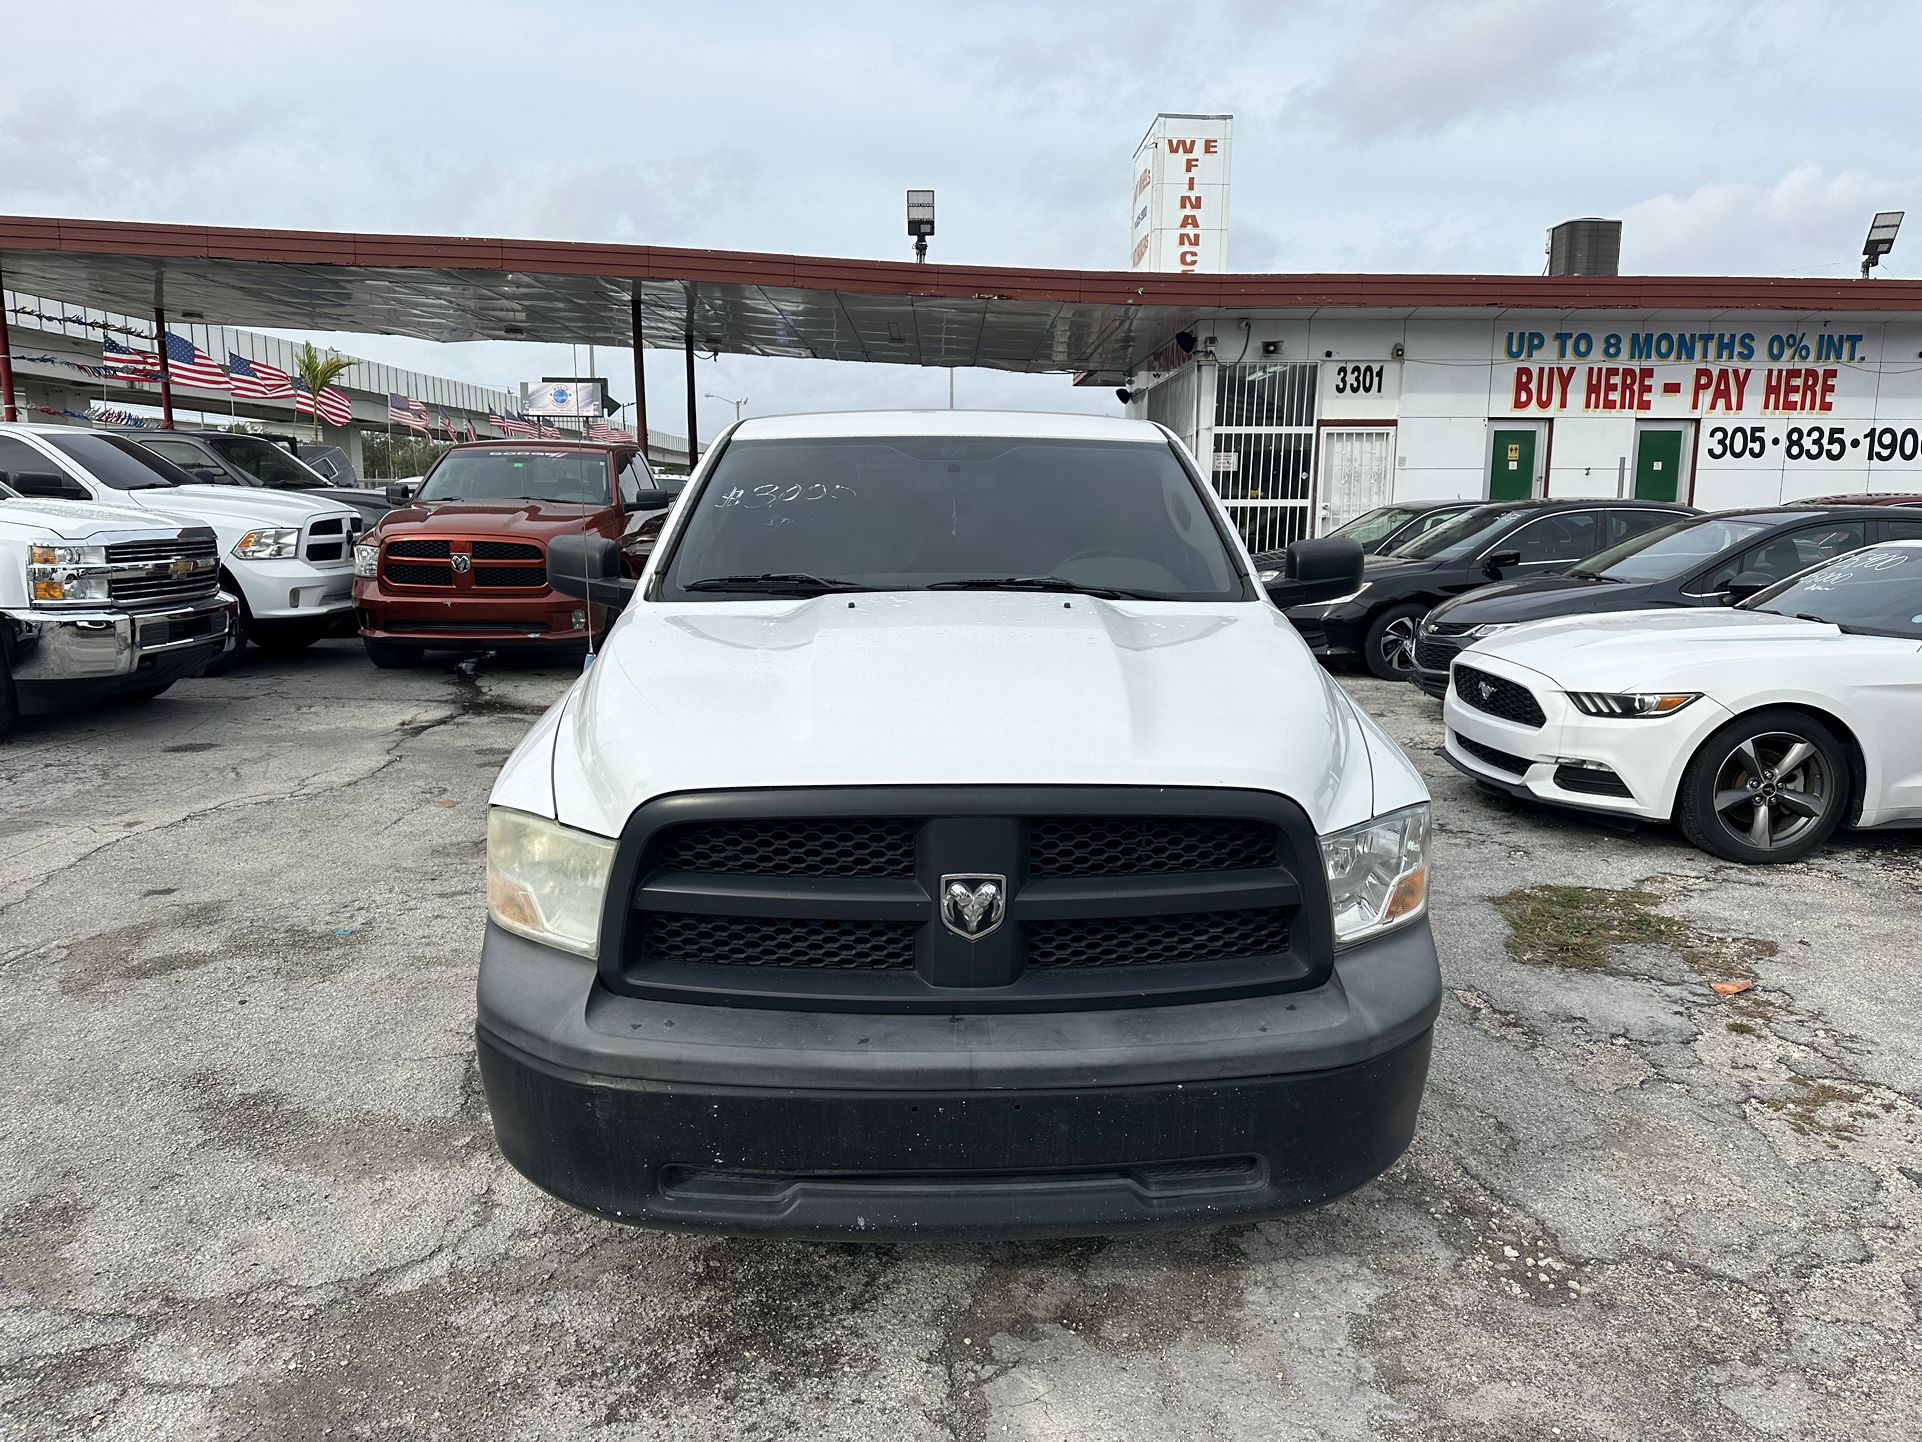 used 2012 DODGE RAM - front view 1